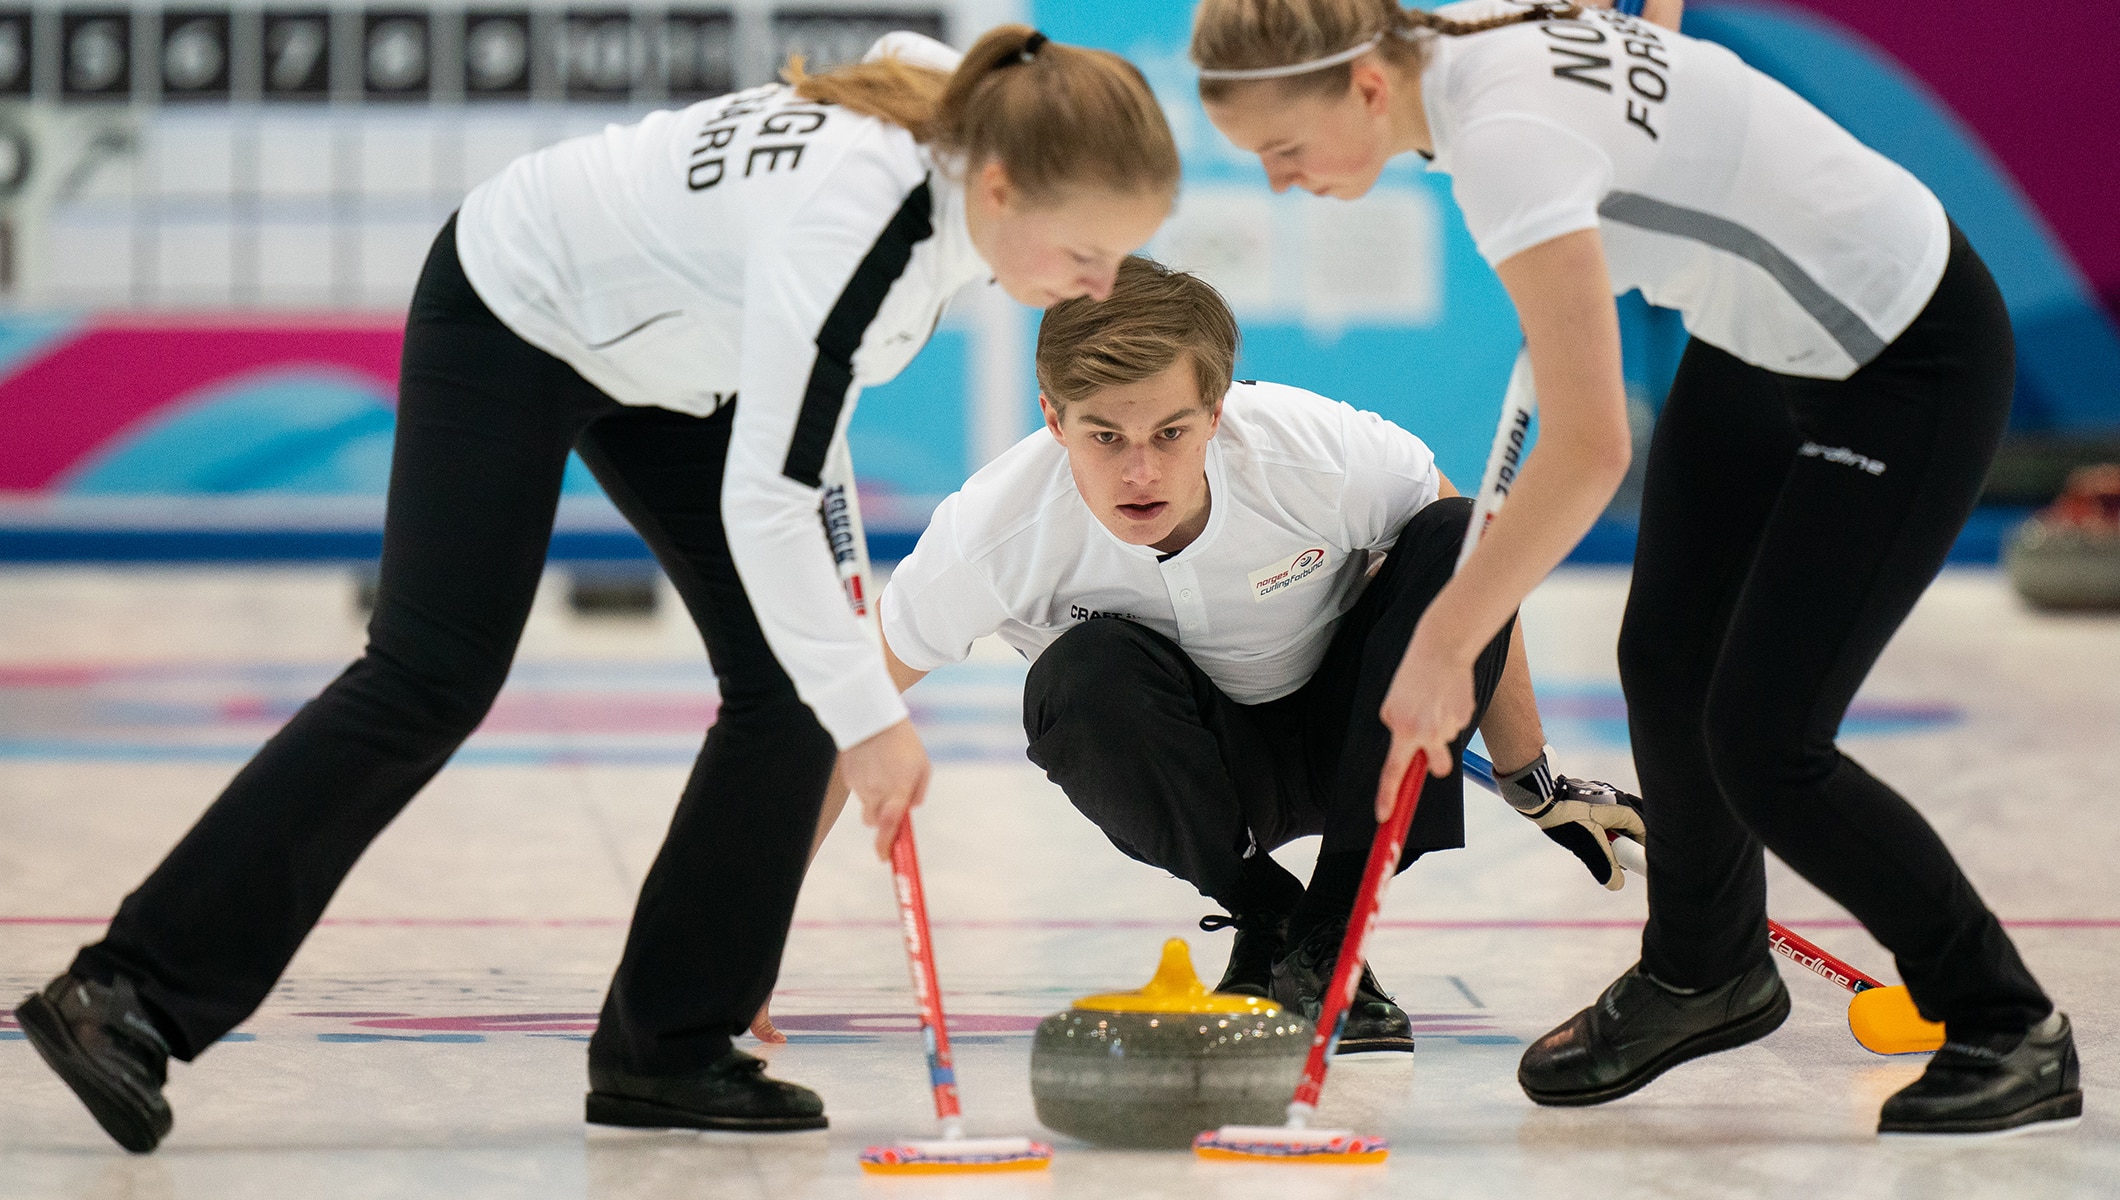 Top Ten Amazing Facts About Curling part 3 